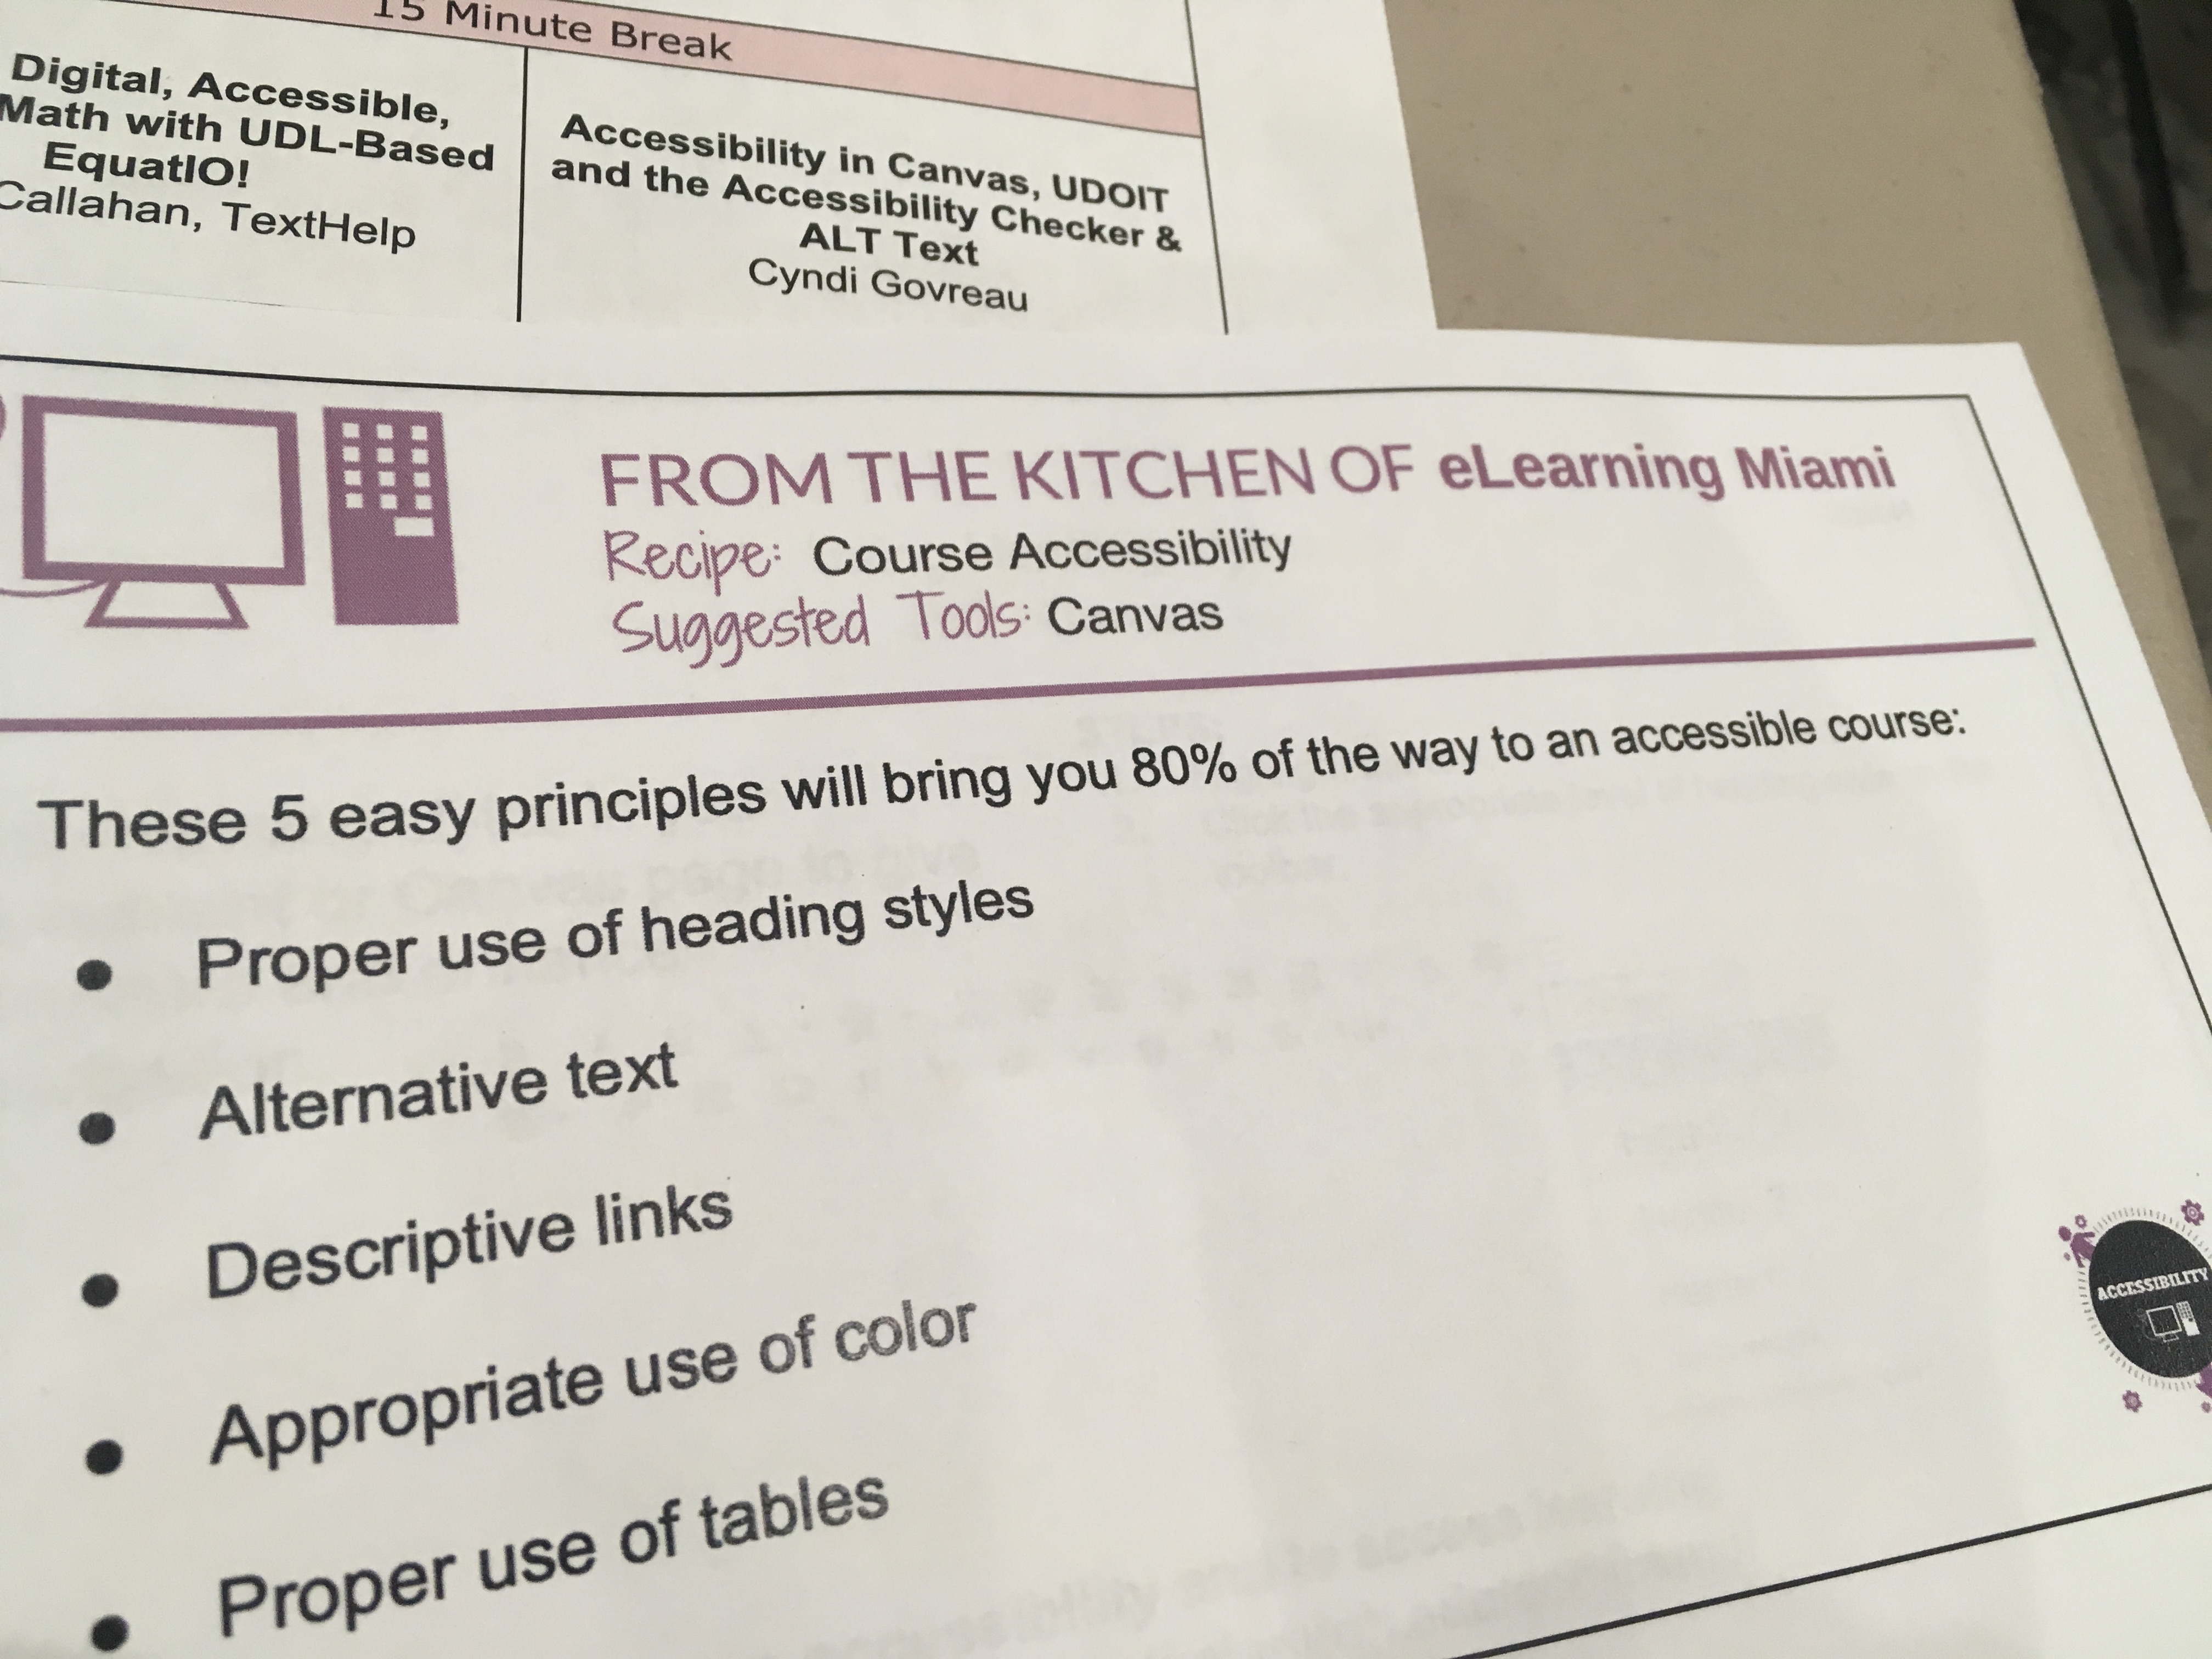 A card handed out by the elearning folks about a recipe for accessibility. 